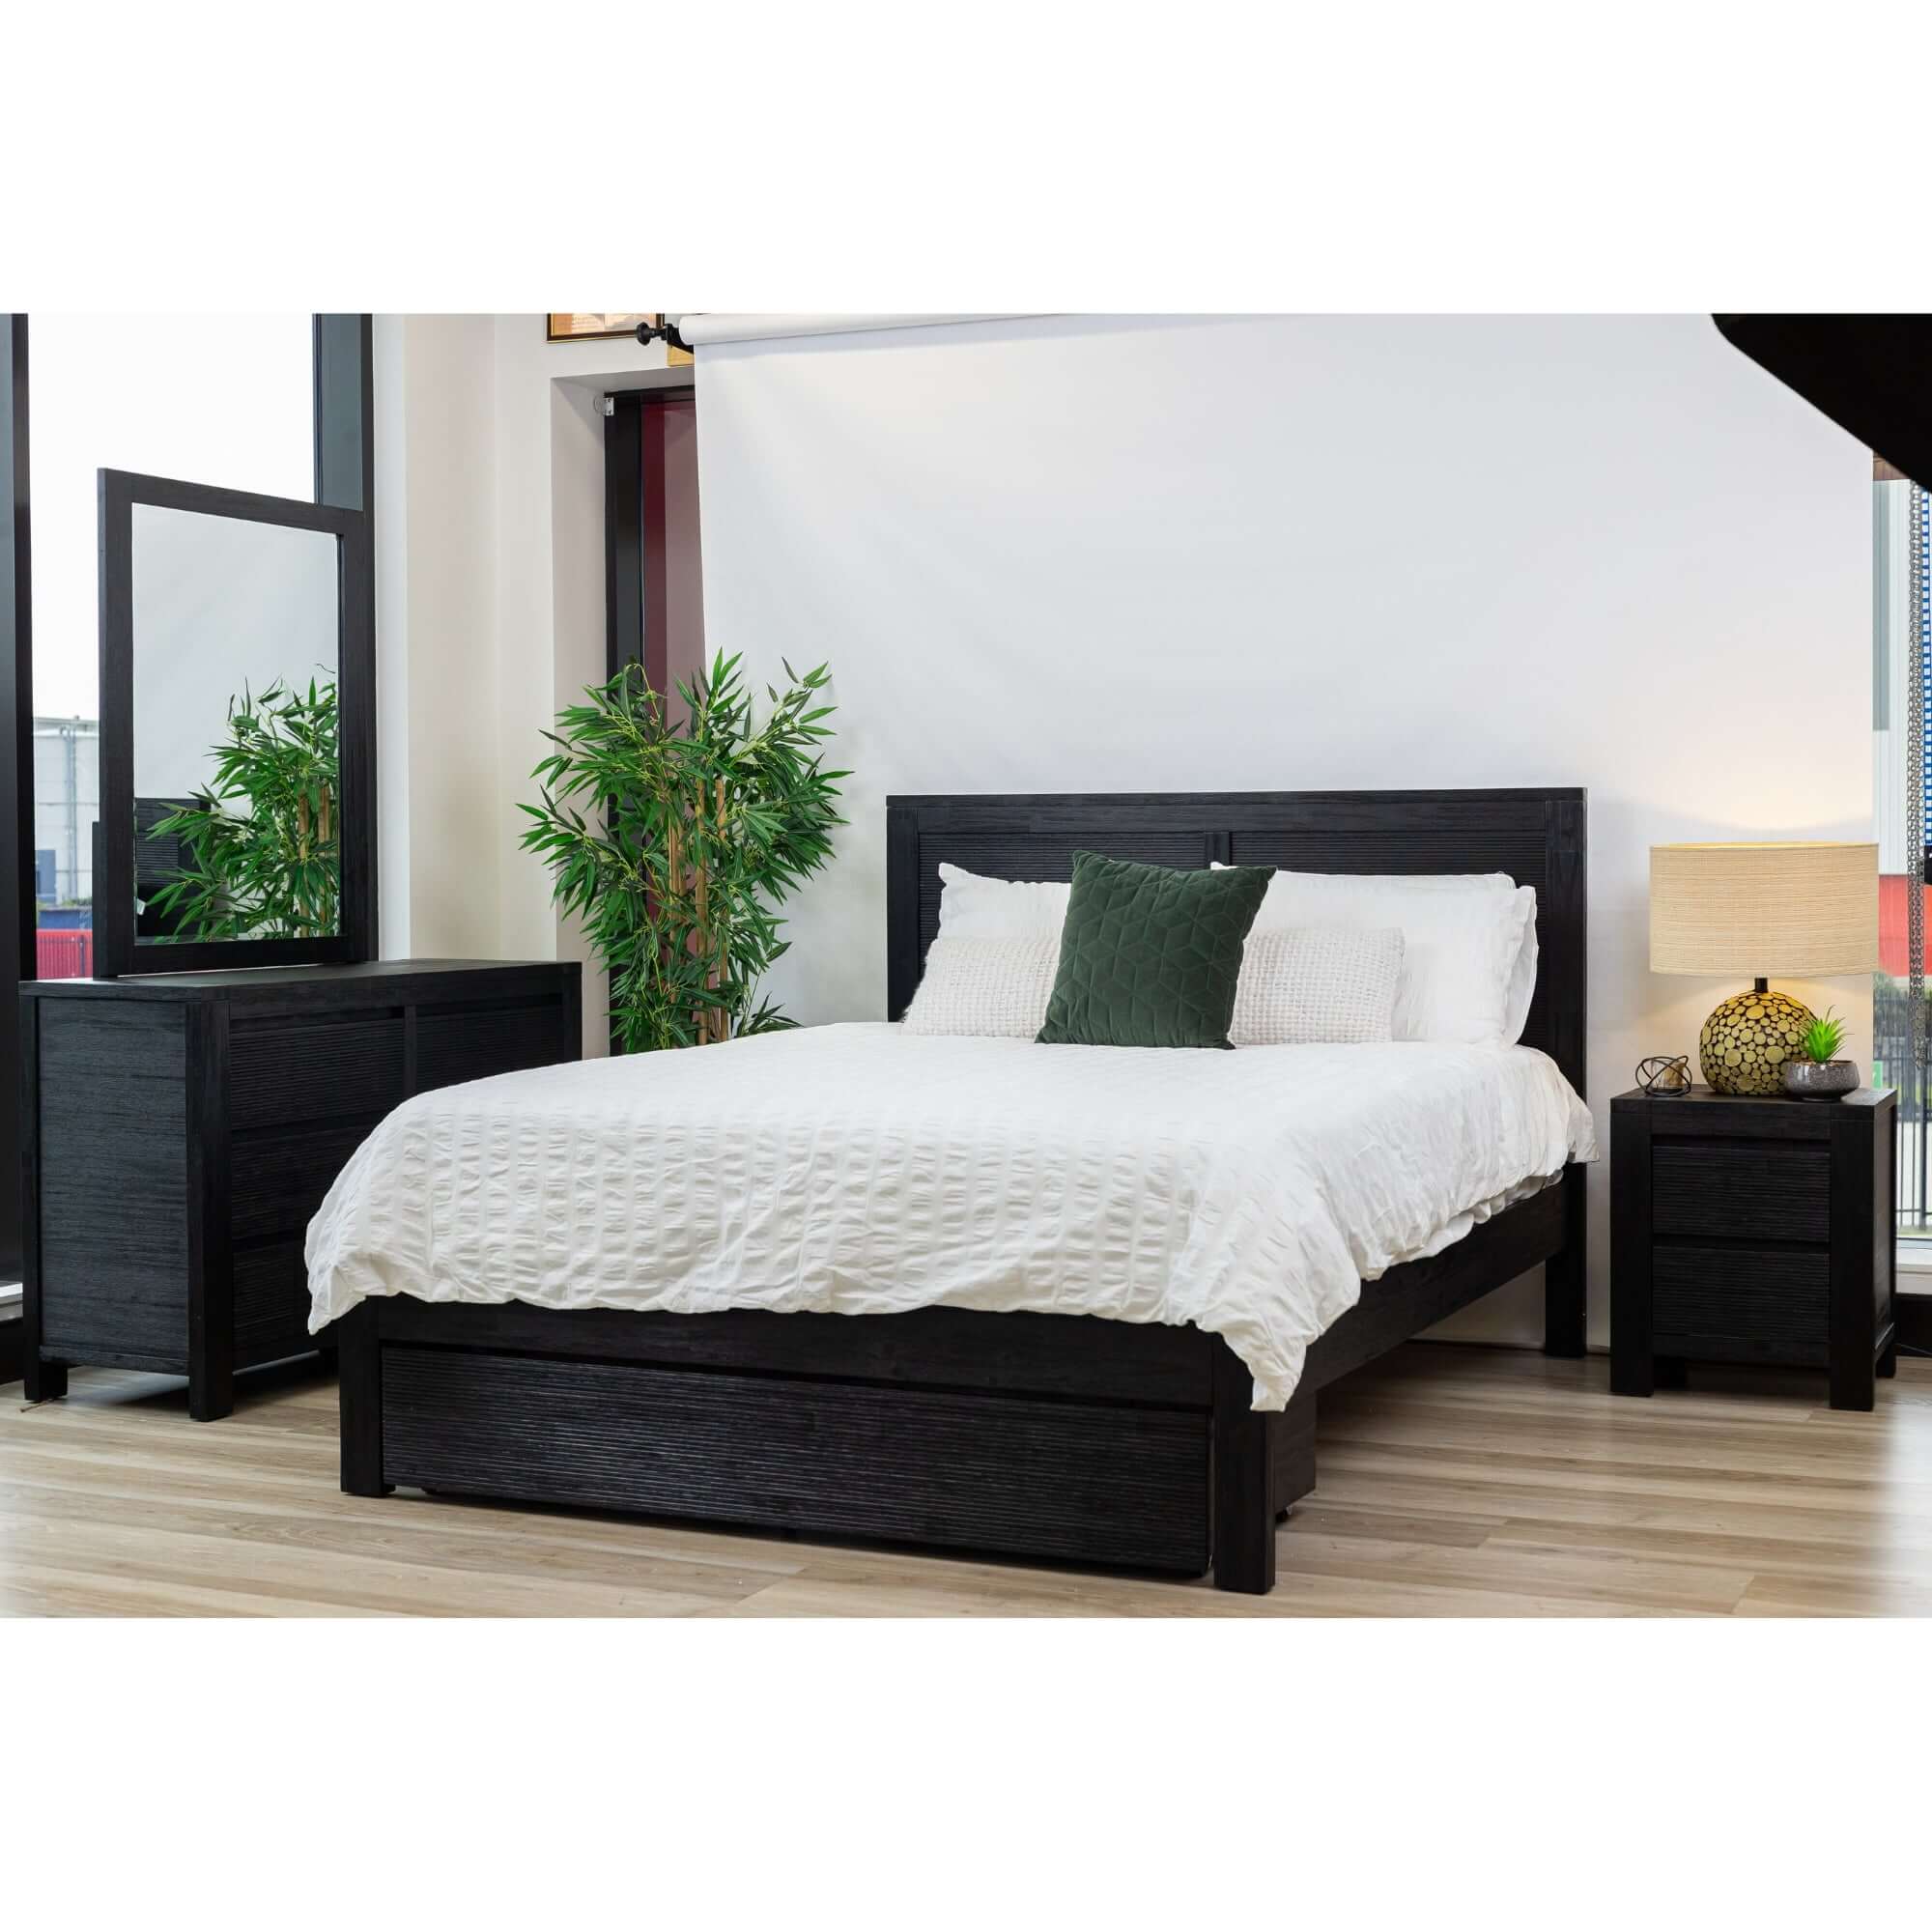 Tofino Bed Frame Queen Size Timber Mattress Base With Storage Drawers - Black-Upinteriors